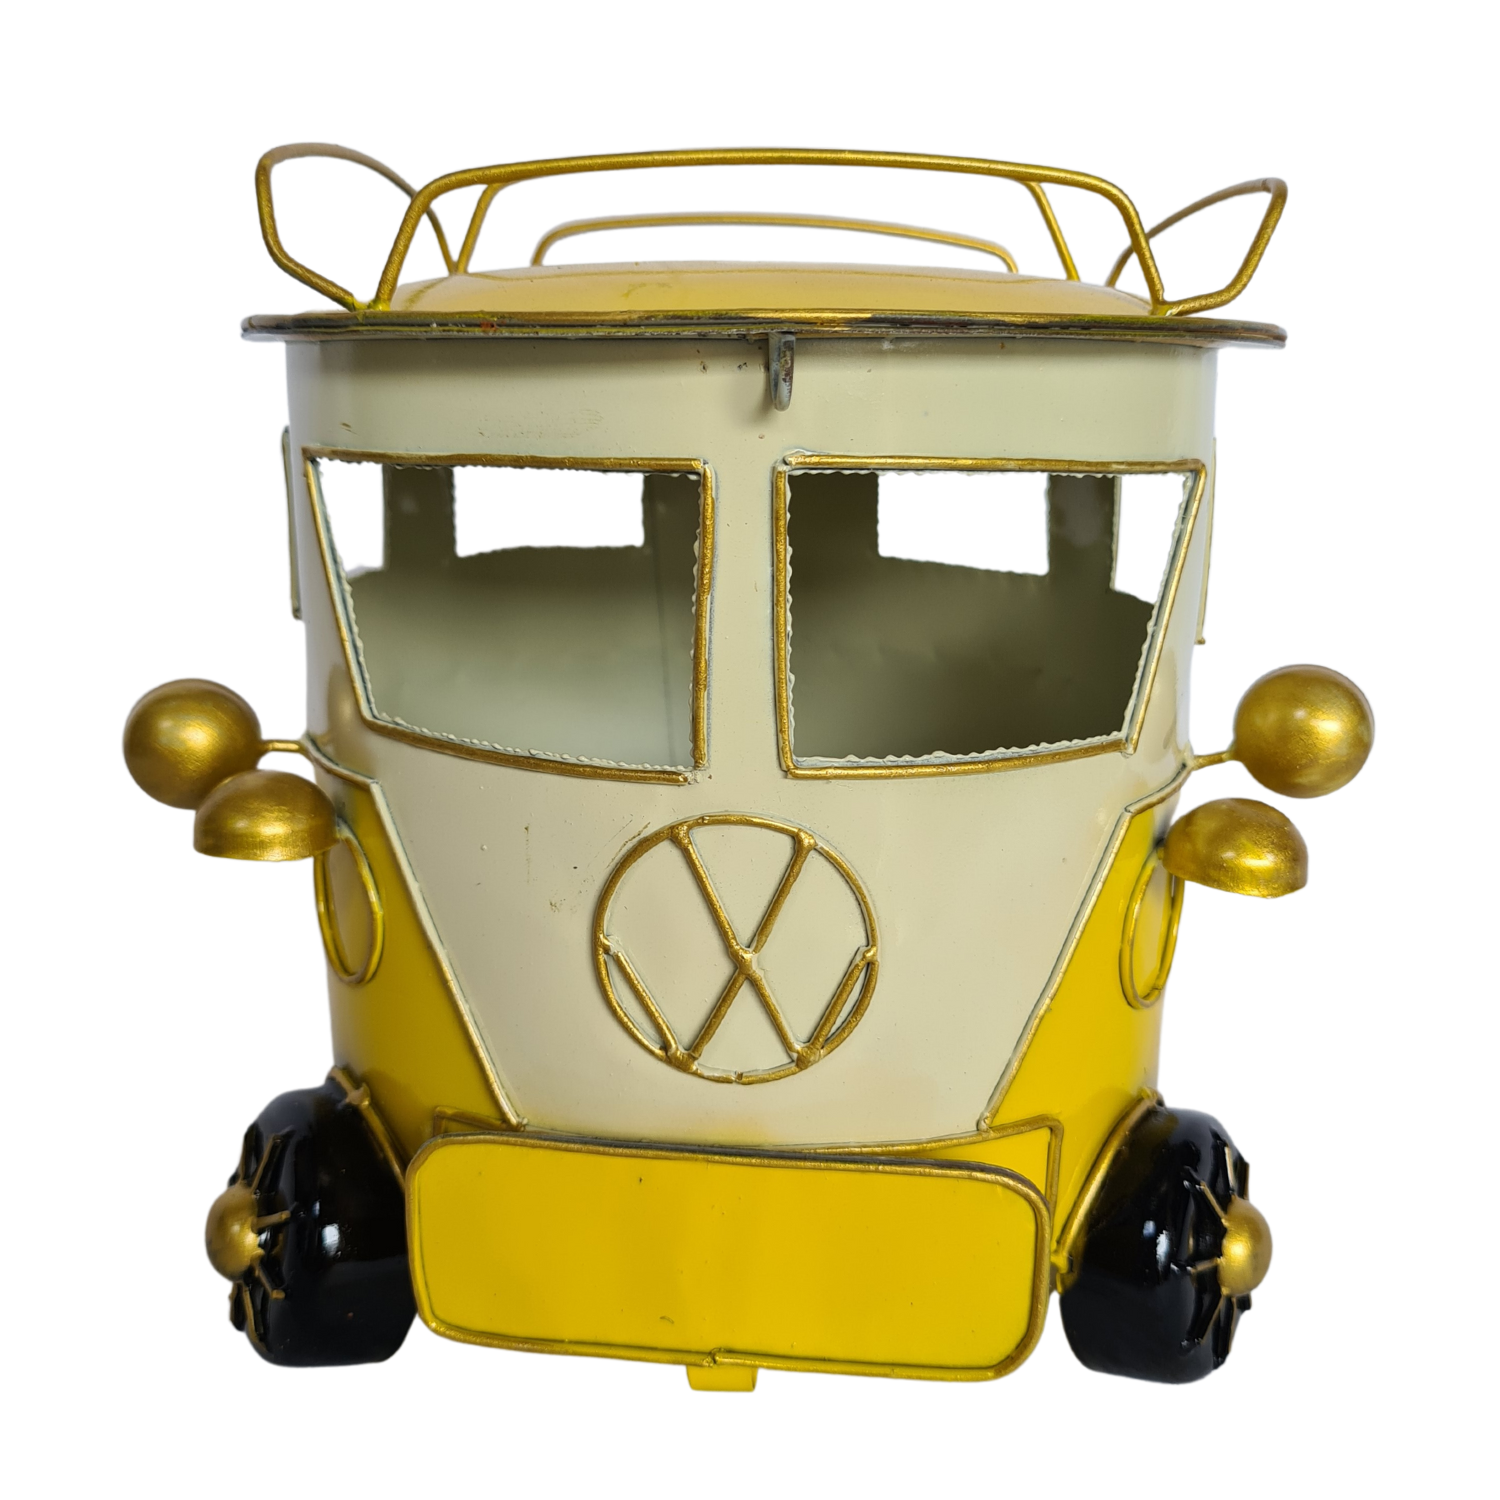 Mosquito coil holder as a funkie VW Combi in yellow colour